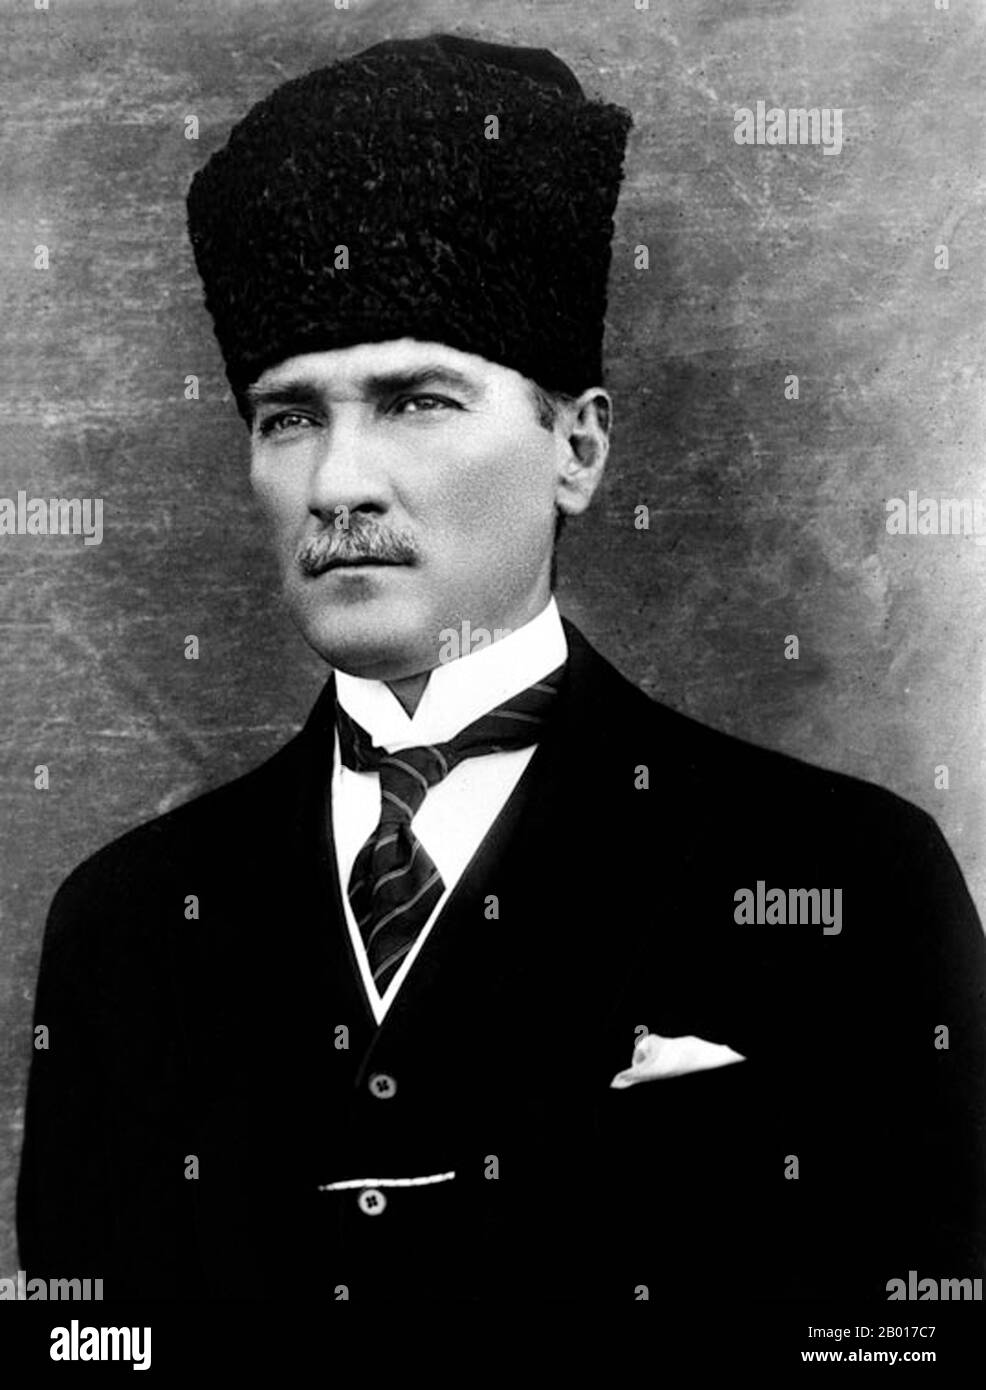 Turkey: Mustafa Kemal Ataturk (1881 - 10  November 1938), early 1920s.  Mustafa Kemal Ataturk was an Ottoman and Turkish army officer, revolutionary statesman, writer, and the first President of Turkey. He is credited with being the founder of the modern Turkish state. Atatürk was a military officer during World War I. Following the defeat of the Ottoman Empire in World War I, he led the Turkish national movement in the Turkish War of Independence. Having established a provisional government in Ankara, he defeated the forces sent by the Allies. Stock Photo